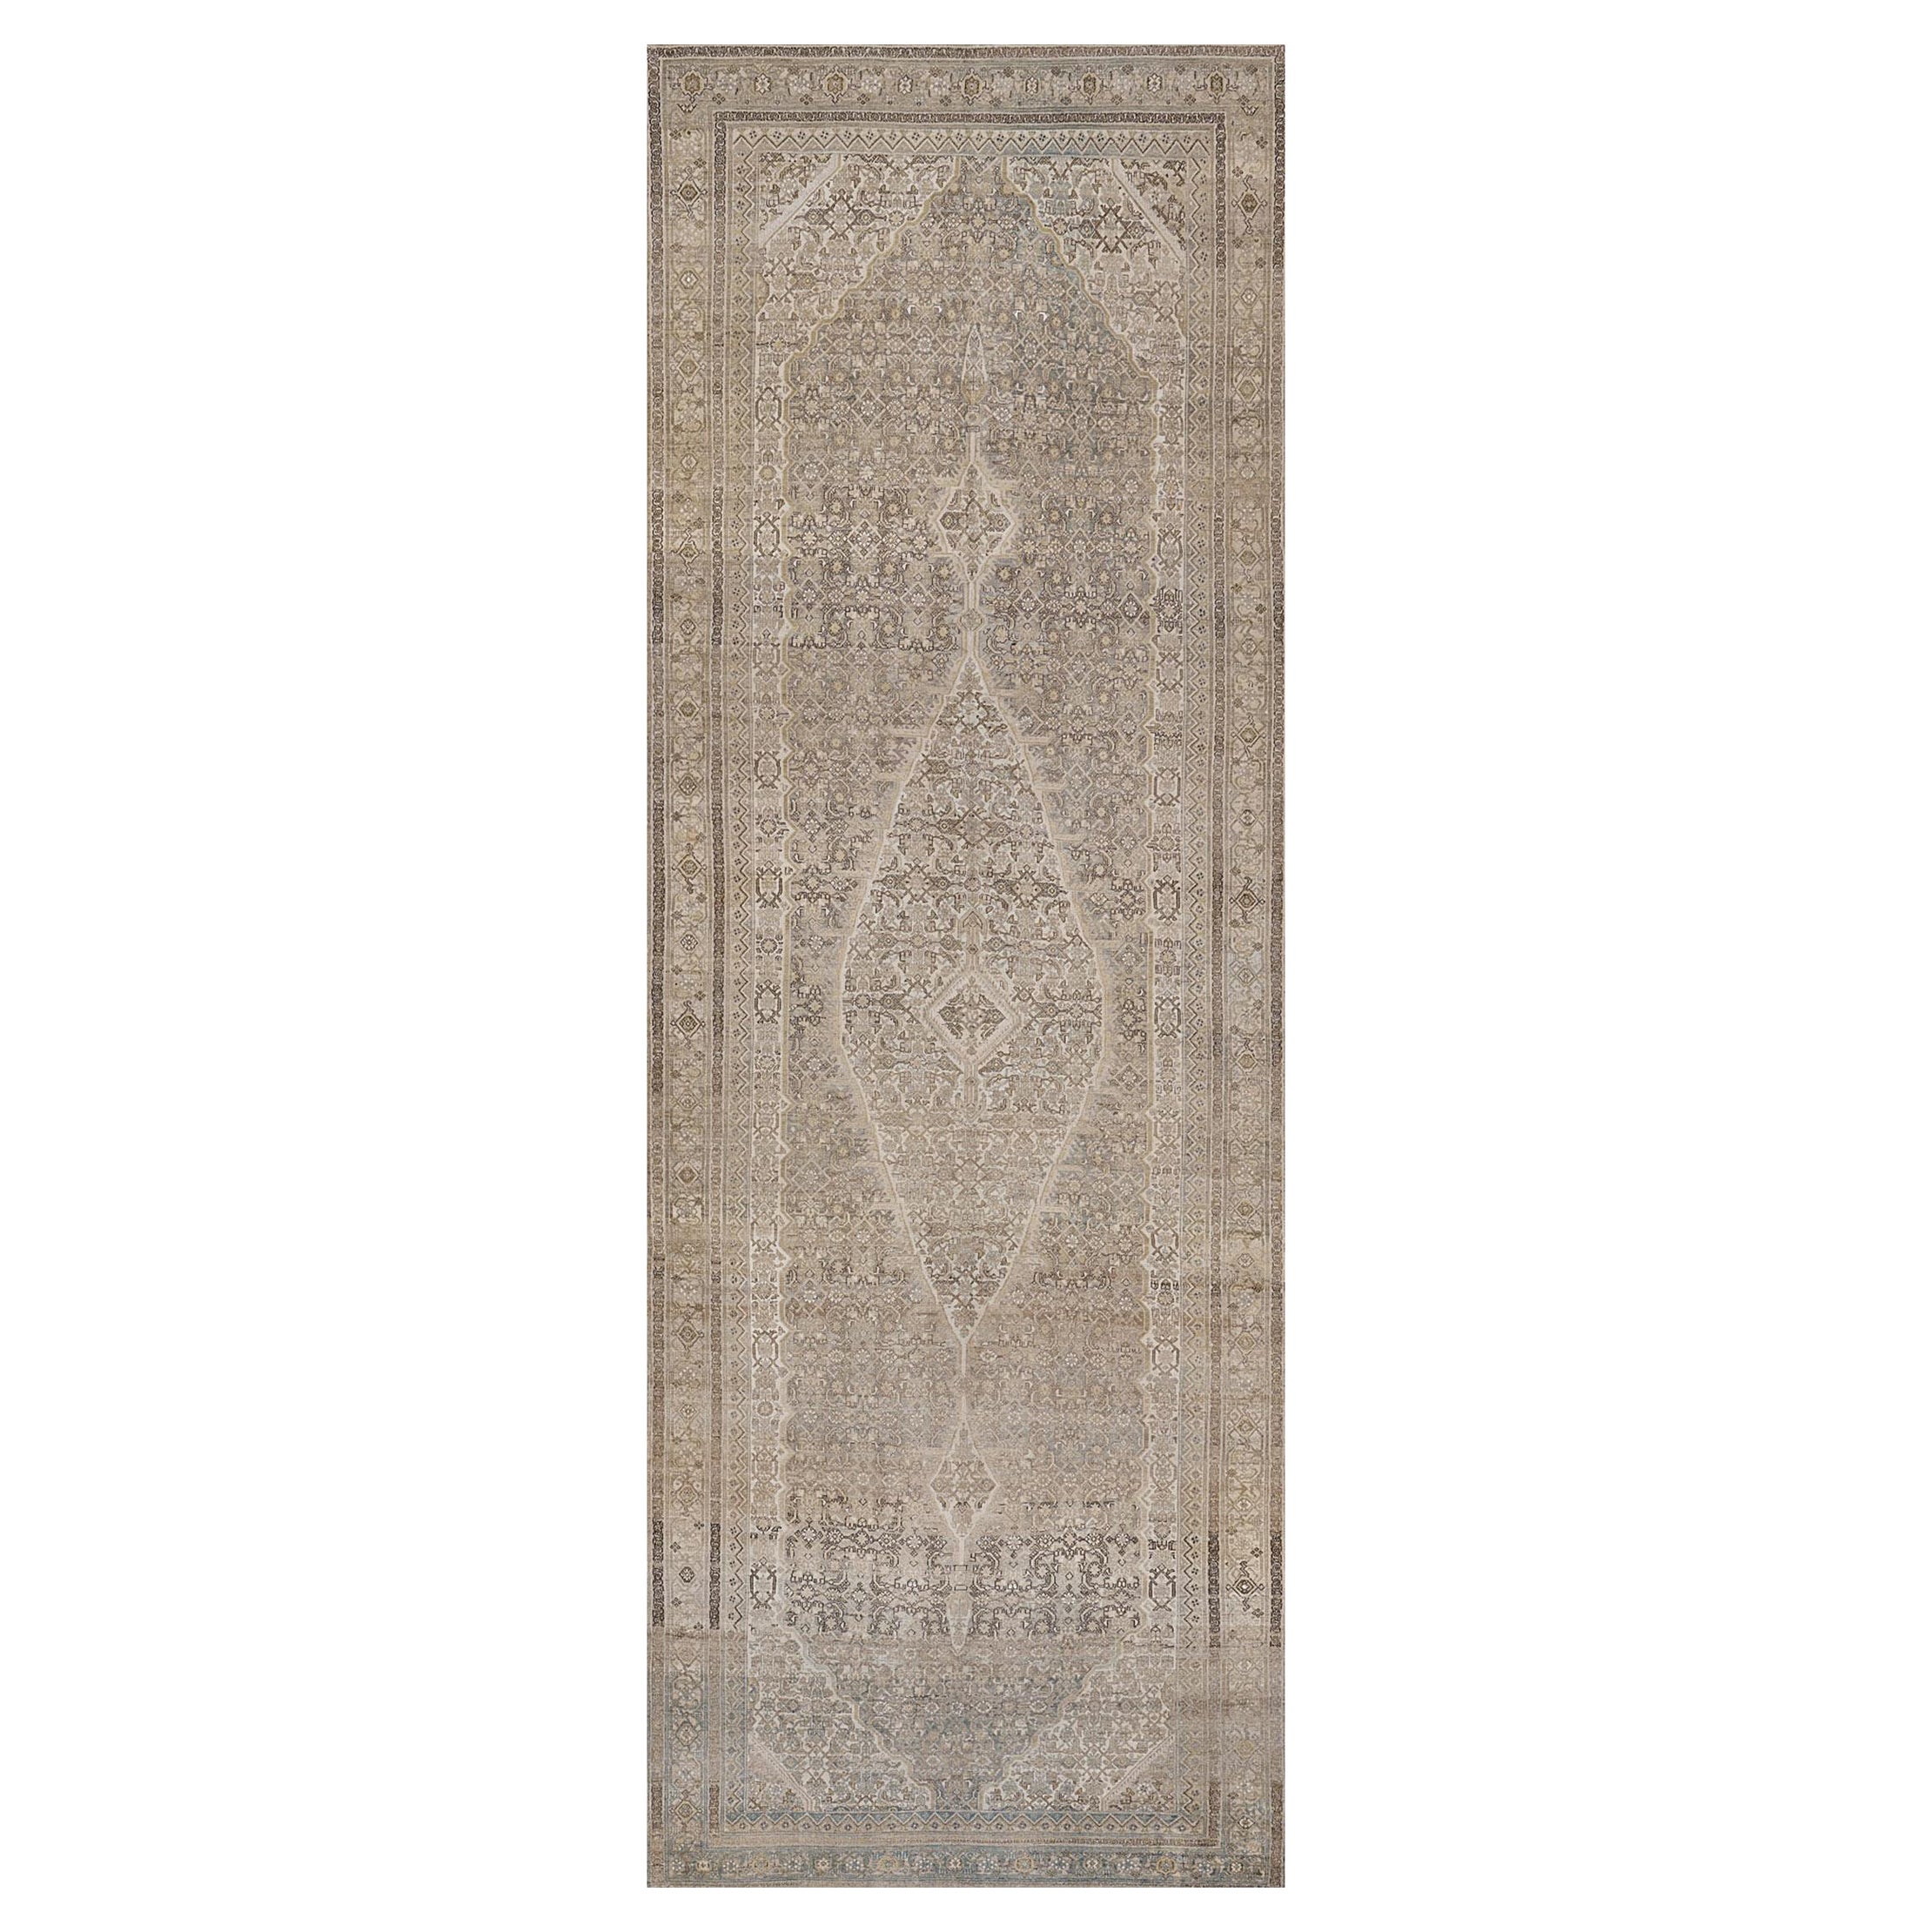 Antique Wool Hand-Knotted Persian Serab Runner Large Size - 8'x23' For Sale